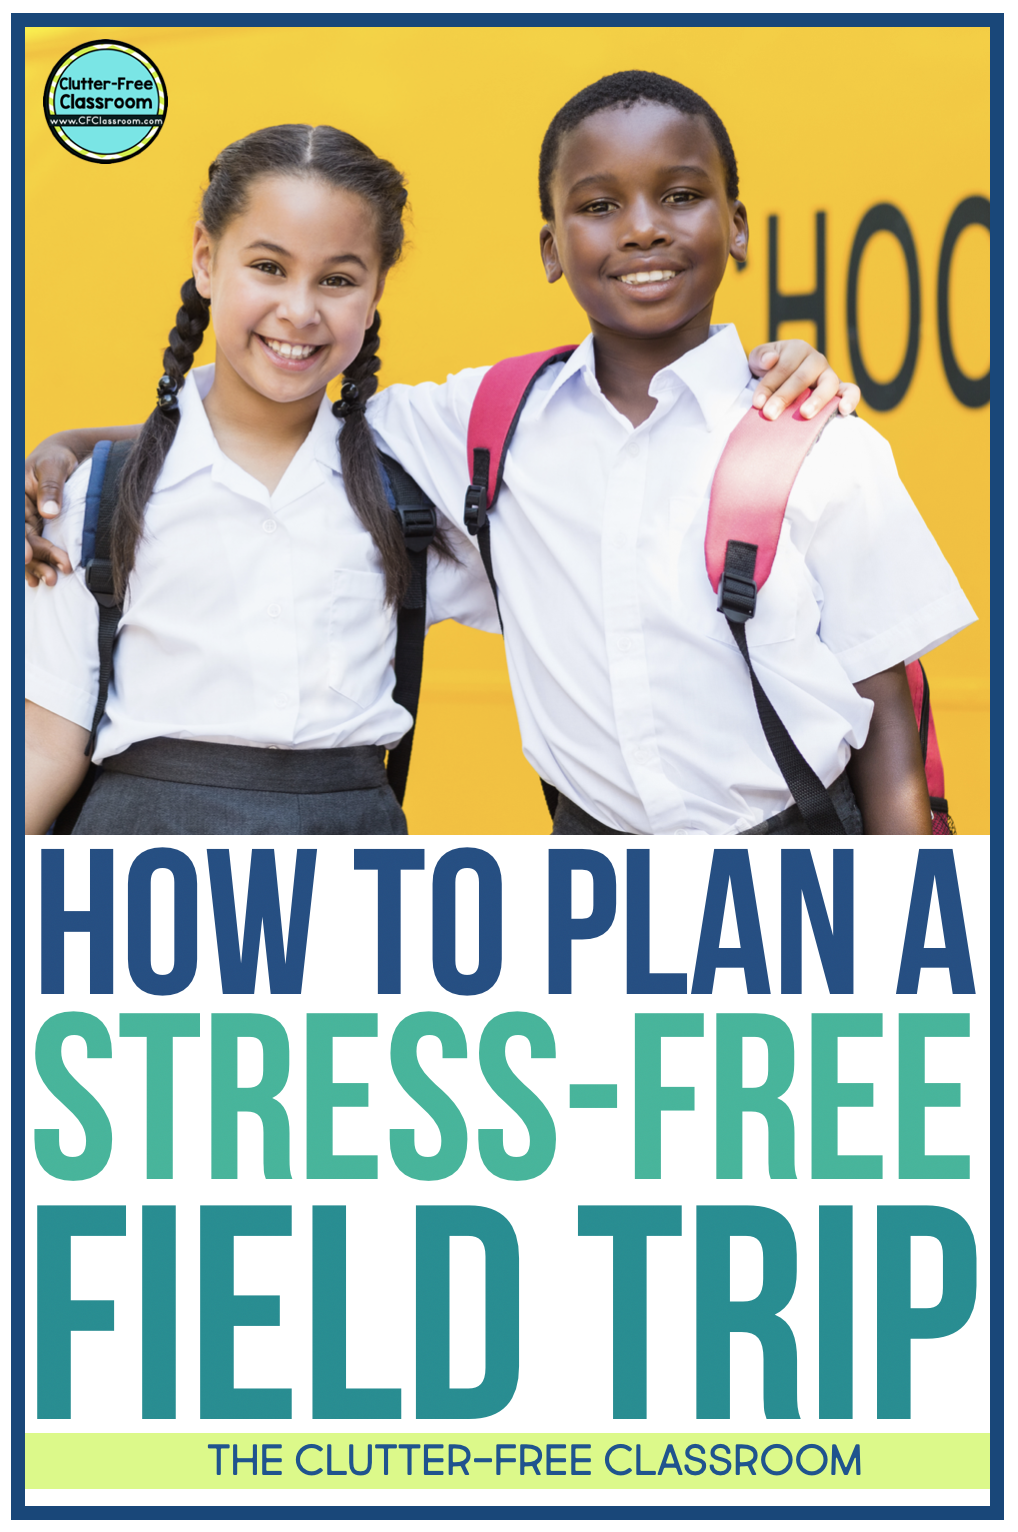 Plan field trips for the kids in your elementary classroom with these classroom management tips and fun activities from the Clutter Free Classroom. Teach each student the procedures, routines, strategies, and techniques to ensure an easy field trip.